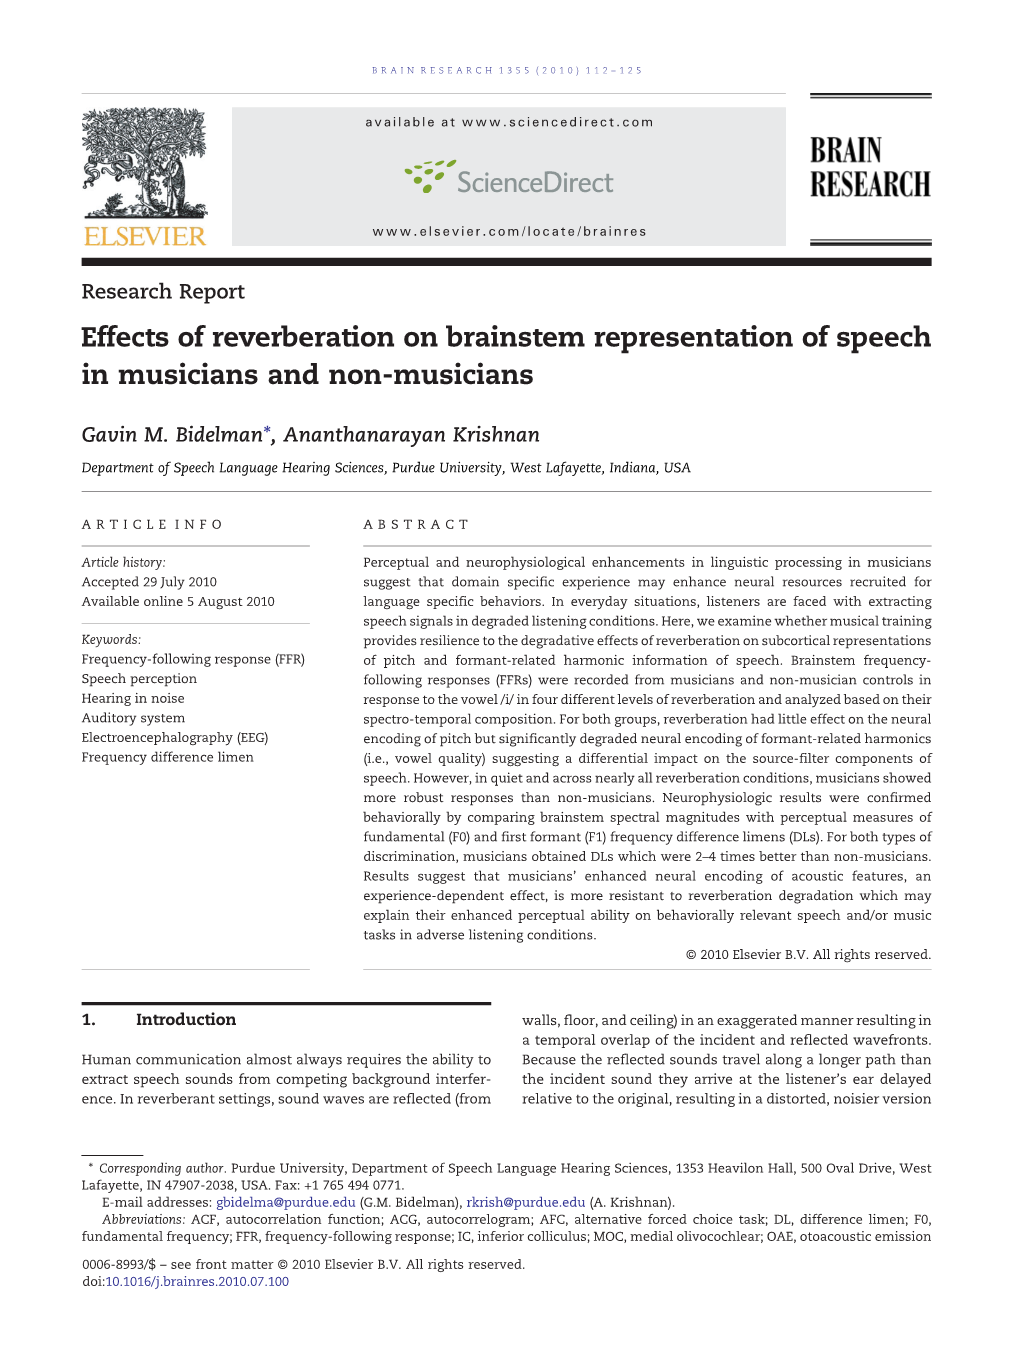 Effects of Reverberation on Brainstem Representation of Speech in Musicians and Non-Musicians